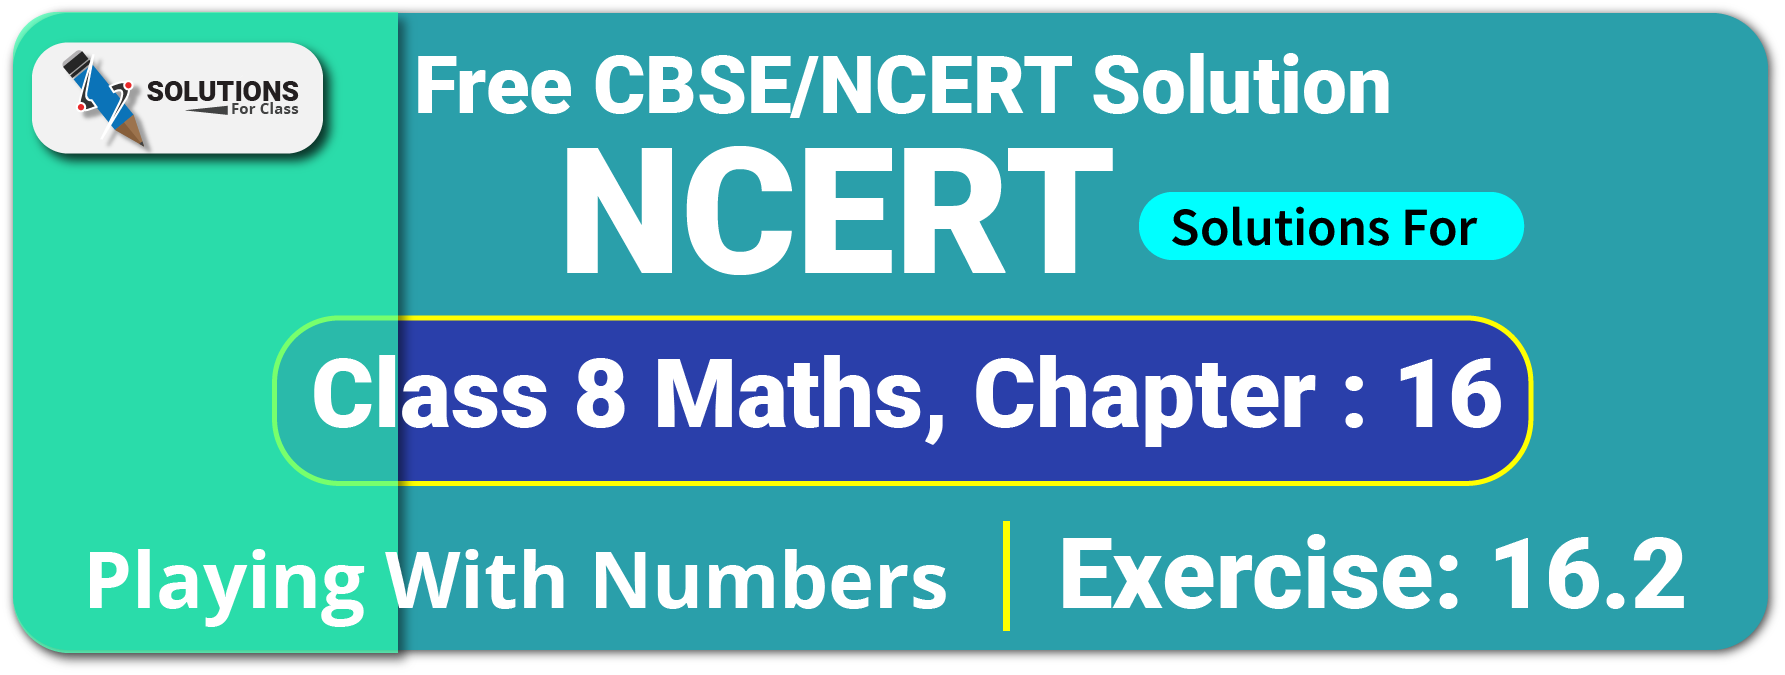 NCERT Solutions For Class 8 Chapter 16, Playing with Numbers, Exercise16.2